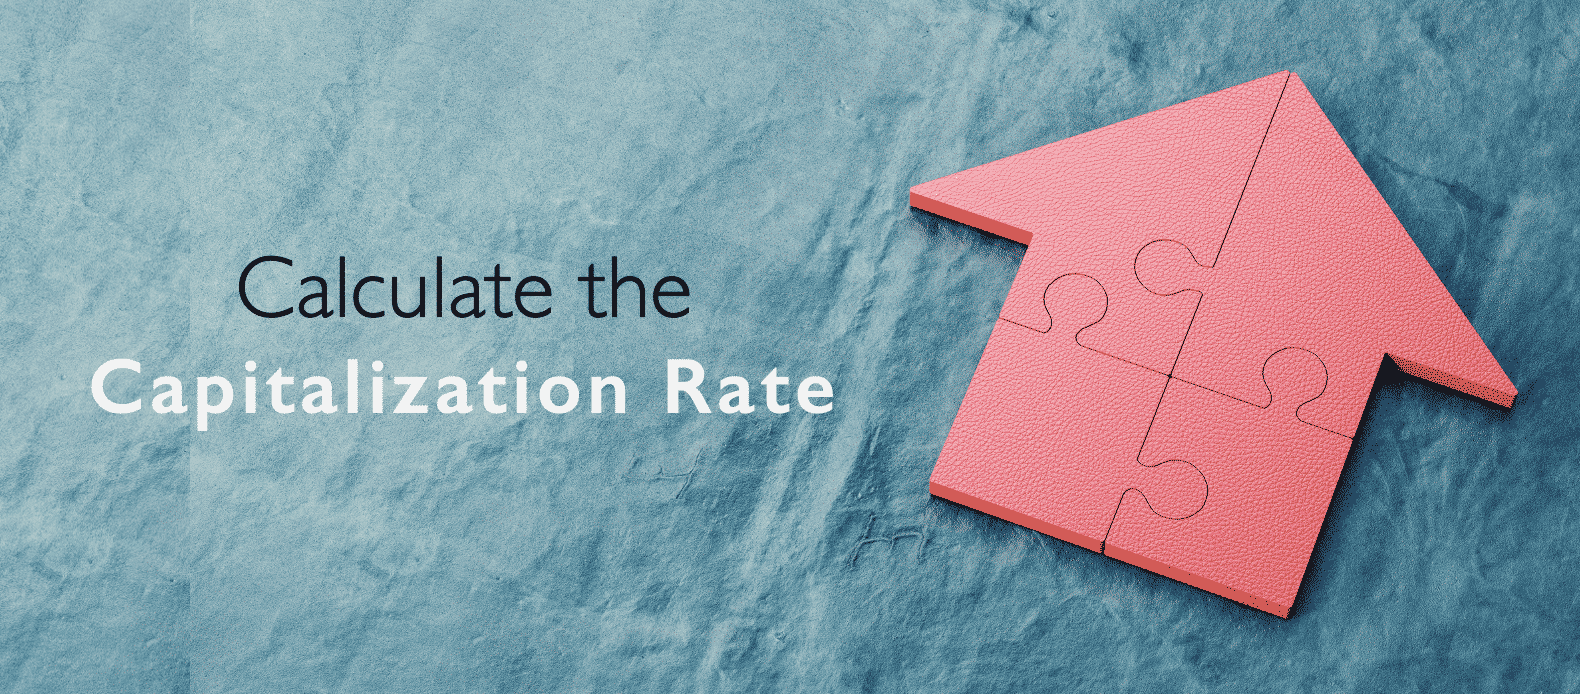 Calculate the Capitalization Rate banner